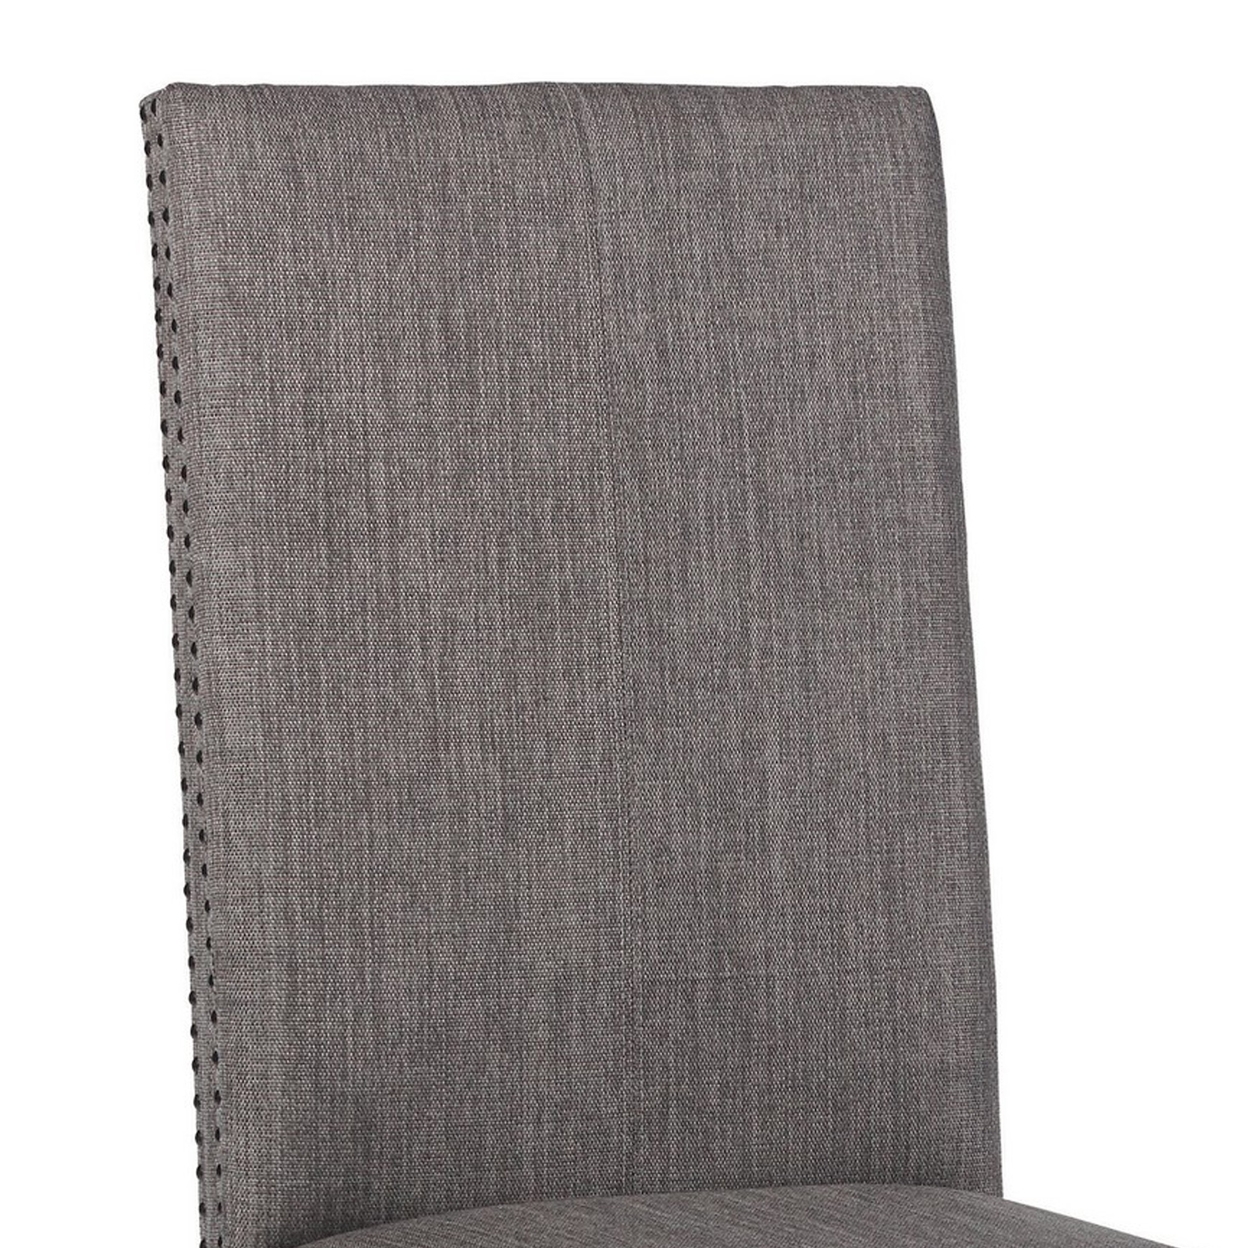 Dining Chair With Nailhead Trim And Fabric Seat, Set Of 2, Gray- Saltoro Sherpi